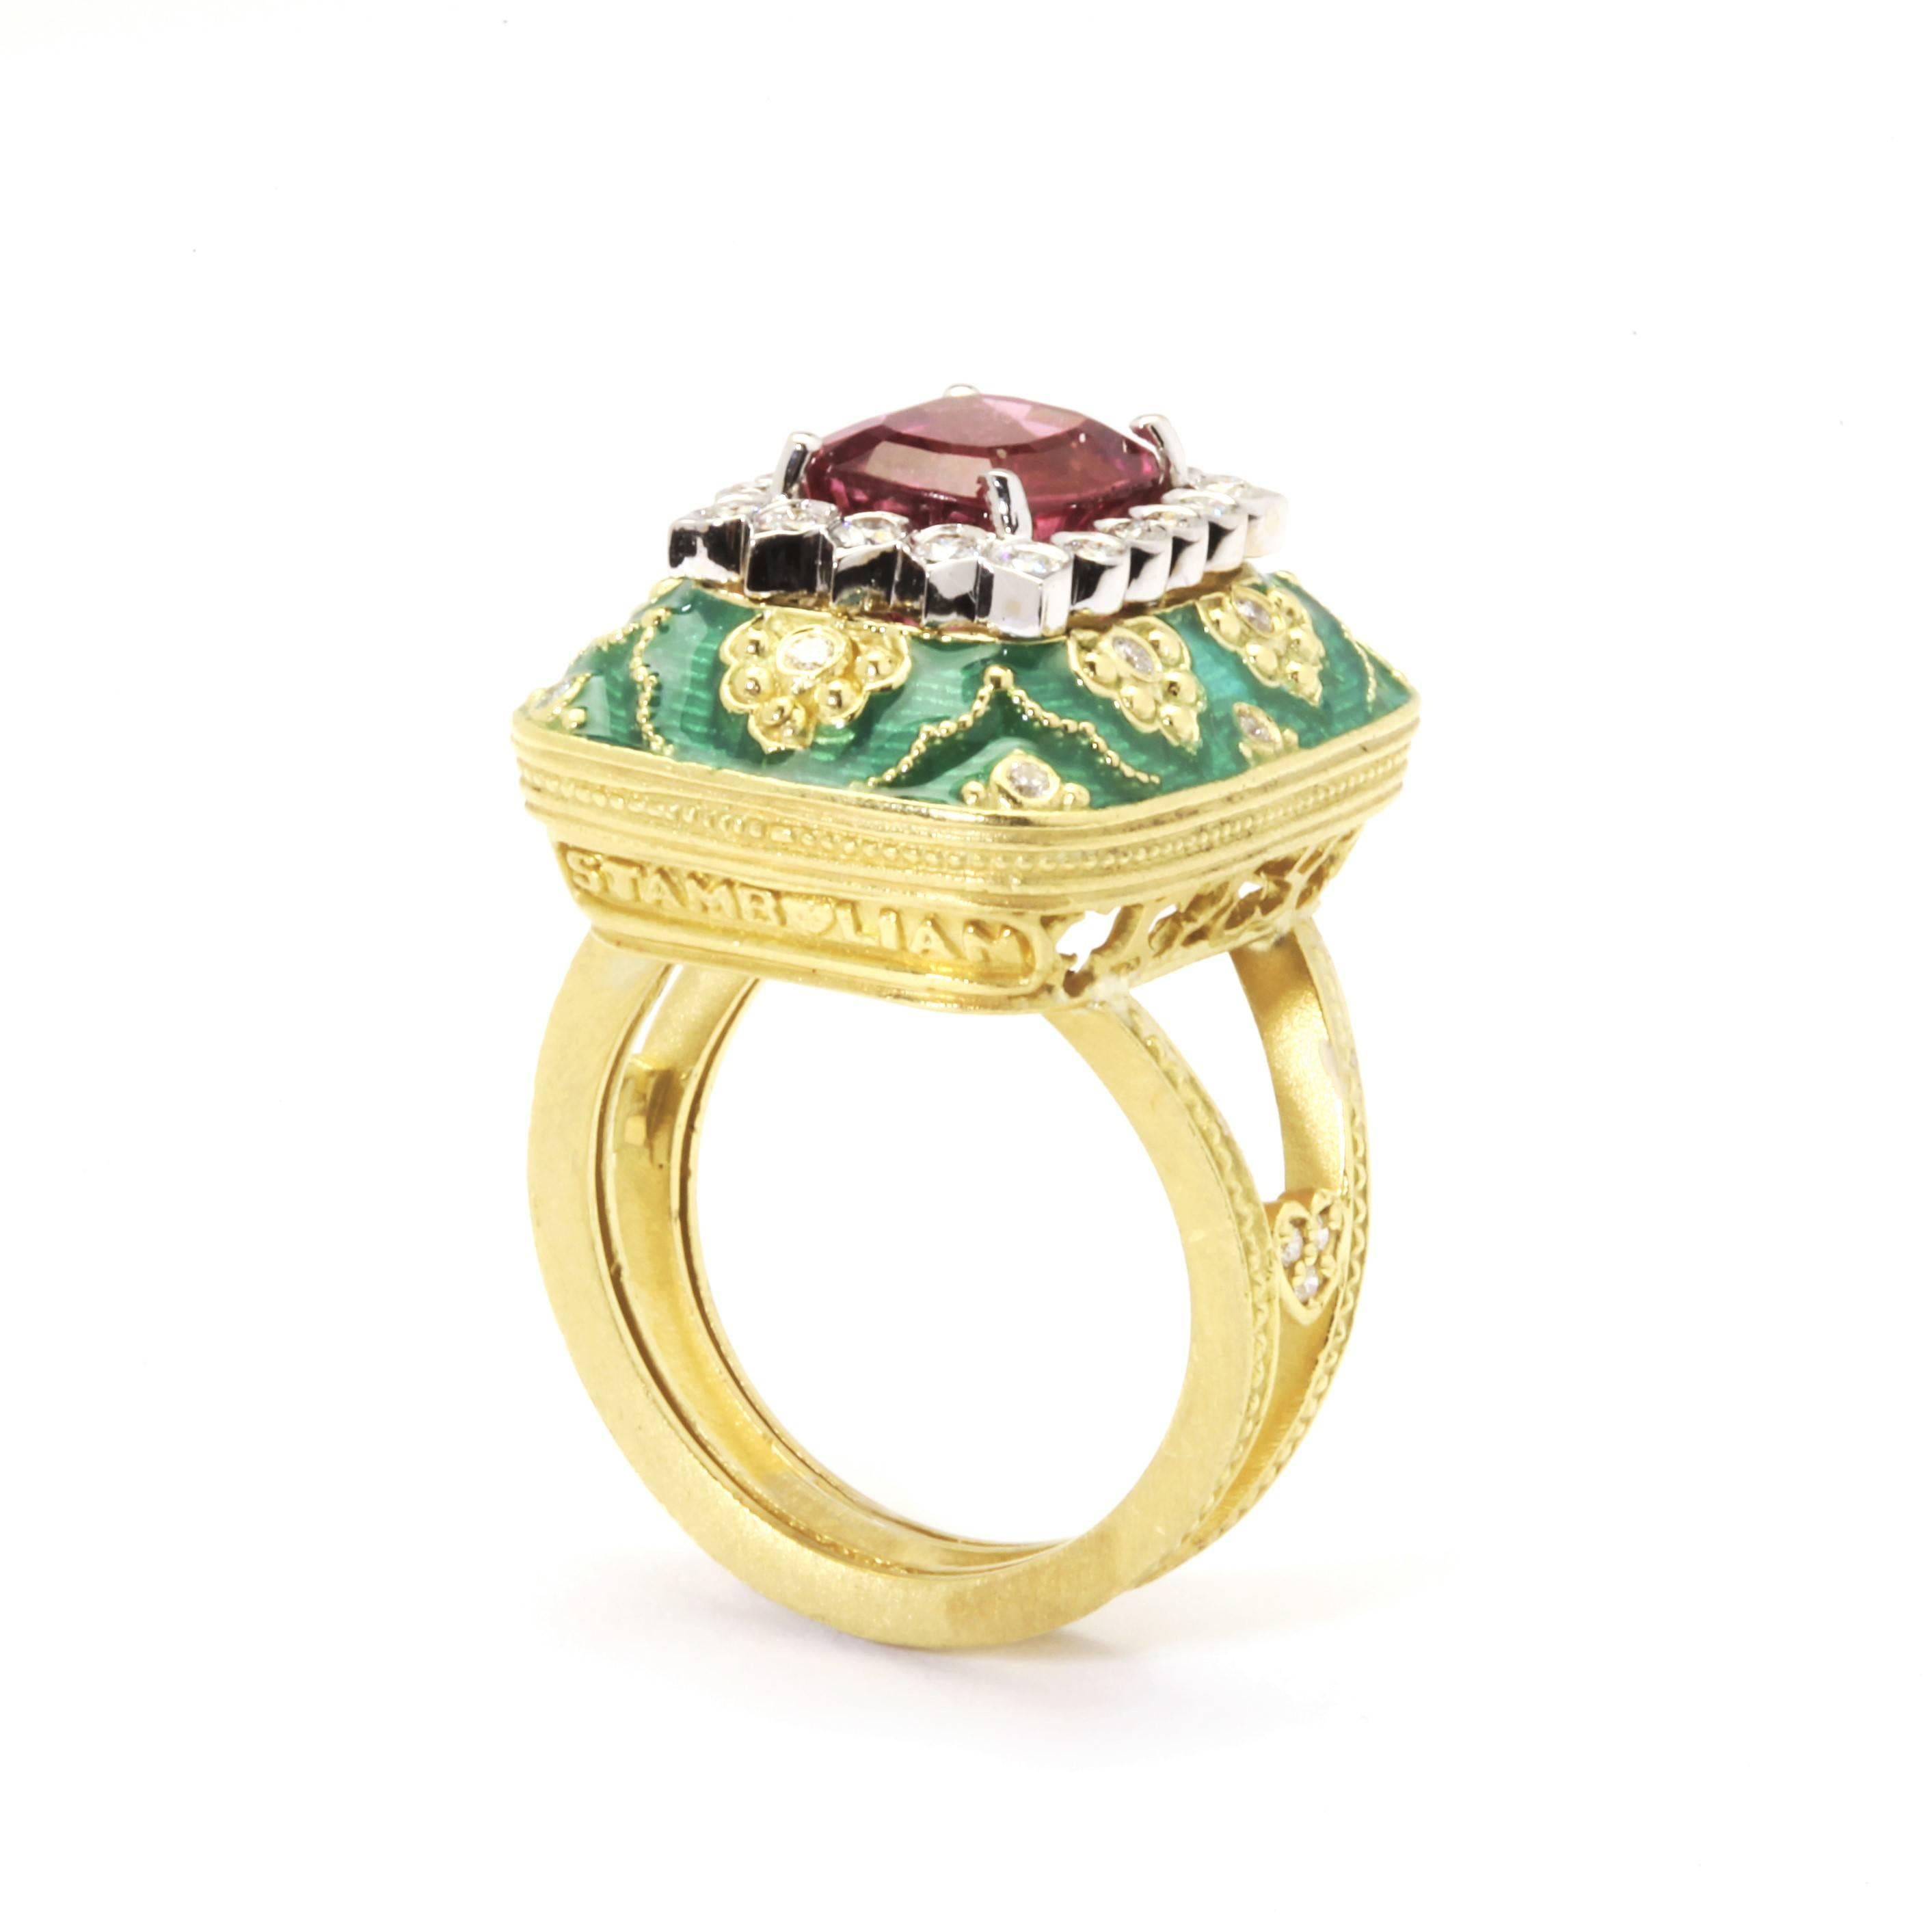 18K Gold Ring with Bubble Gum Pink Tourmaline and Green enamel

Green enamel done throughout design. 
  
Center Bubble Gum Pink Tourmaline 3.25ct.  

Sizable, currently 6 1/2.   

0.50ct. G Color, VS Quality Diamonds 
 
ONE OF A KIND